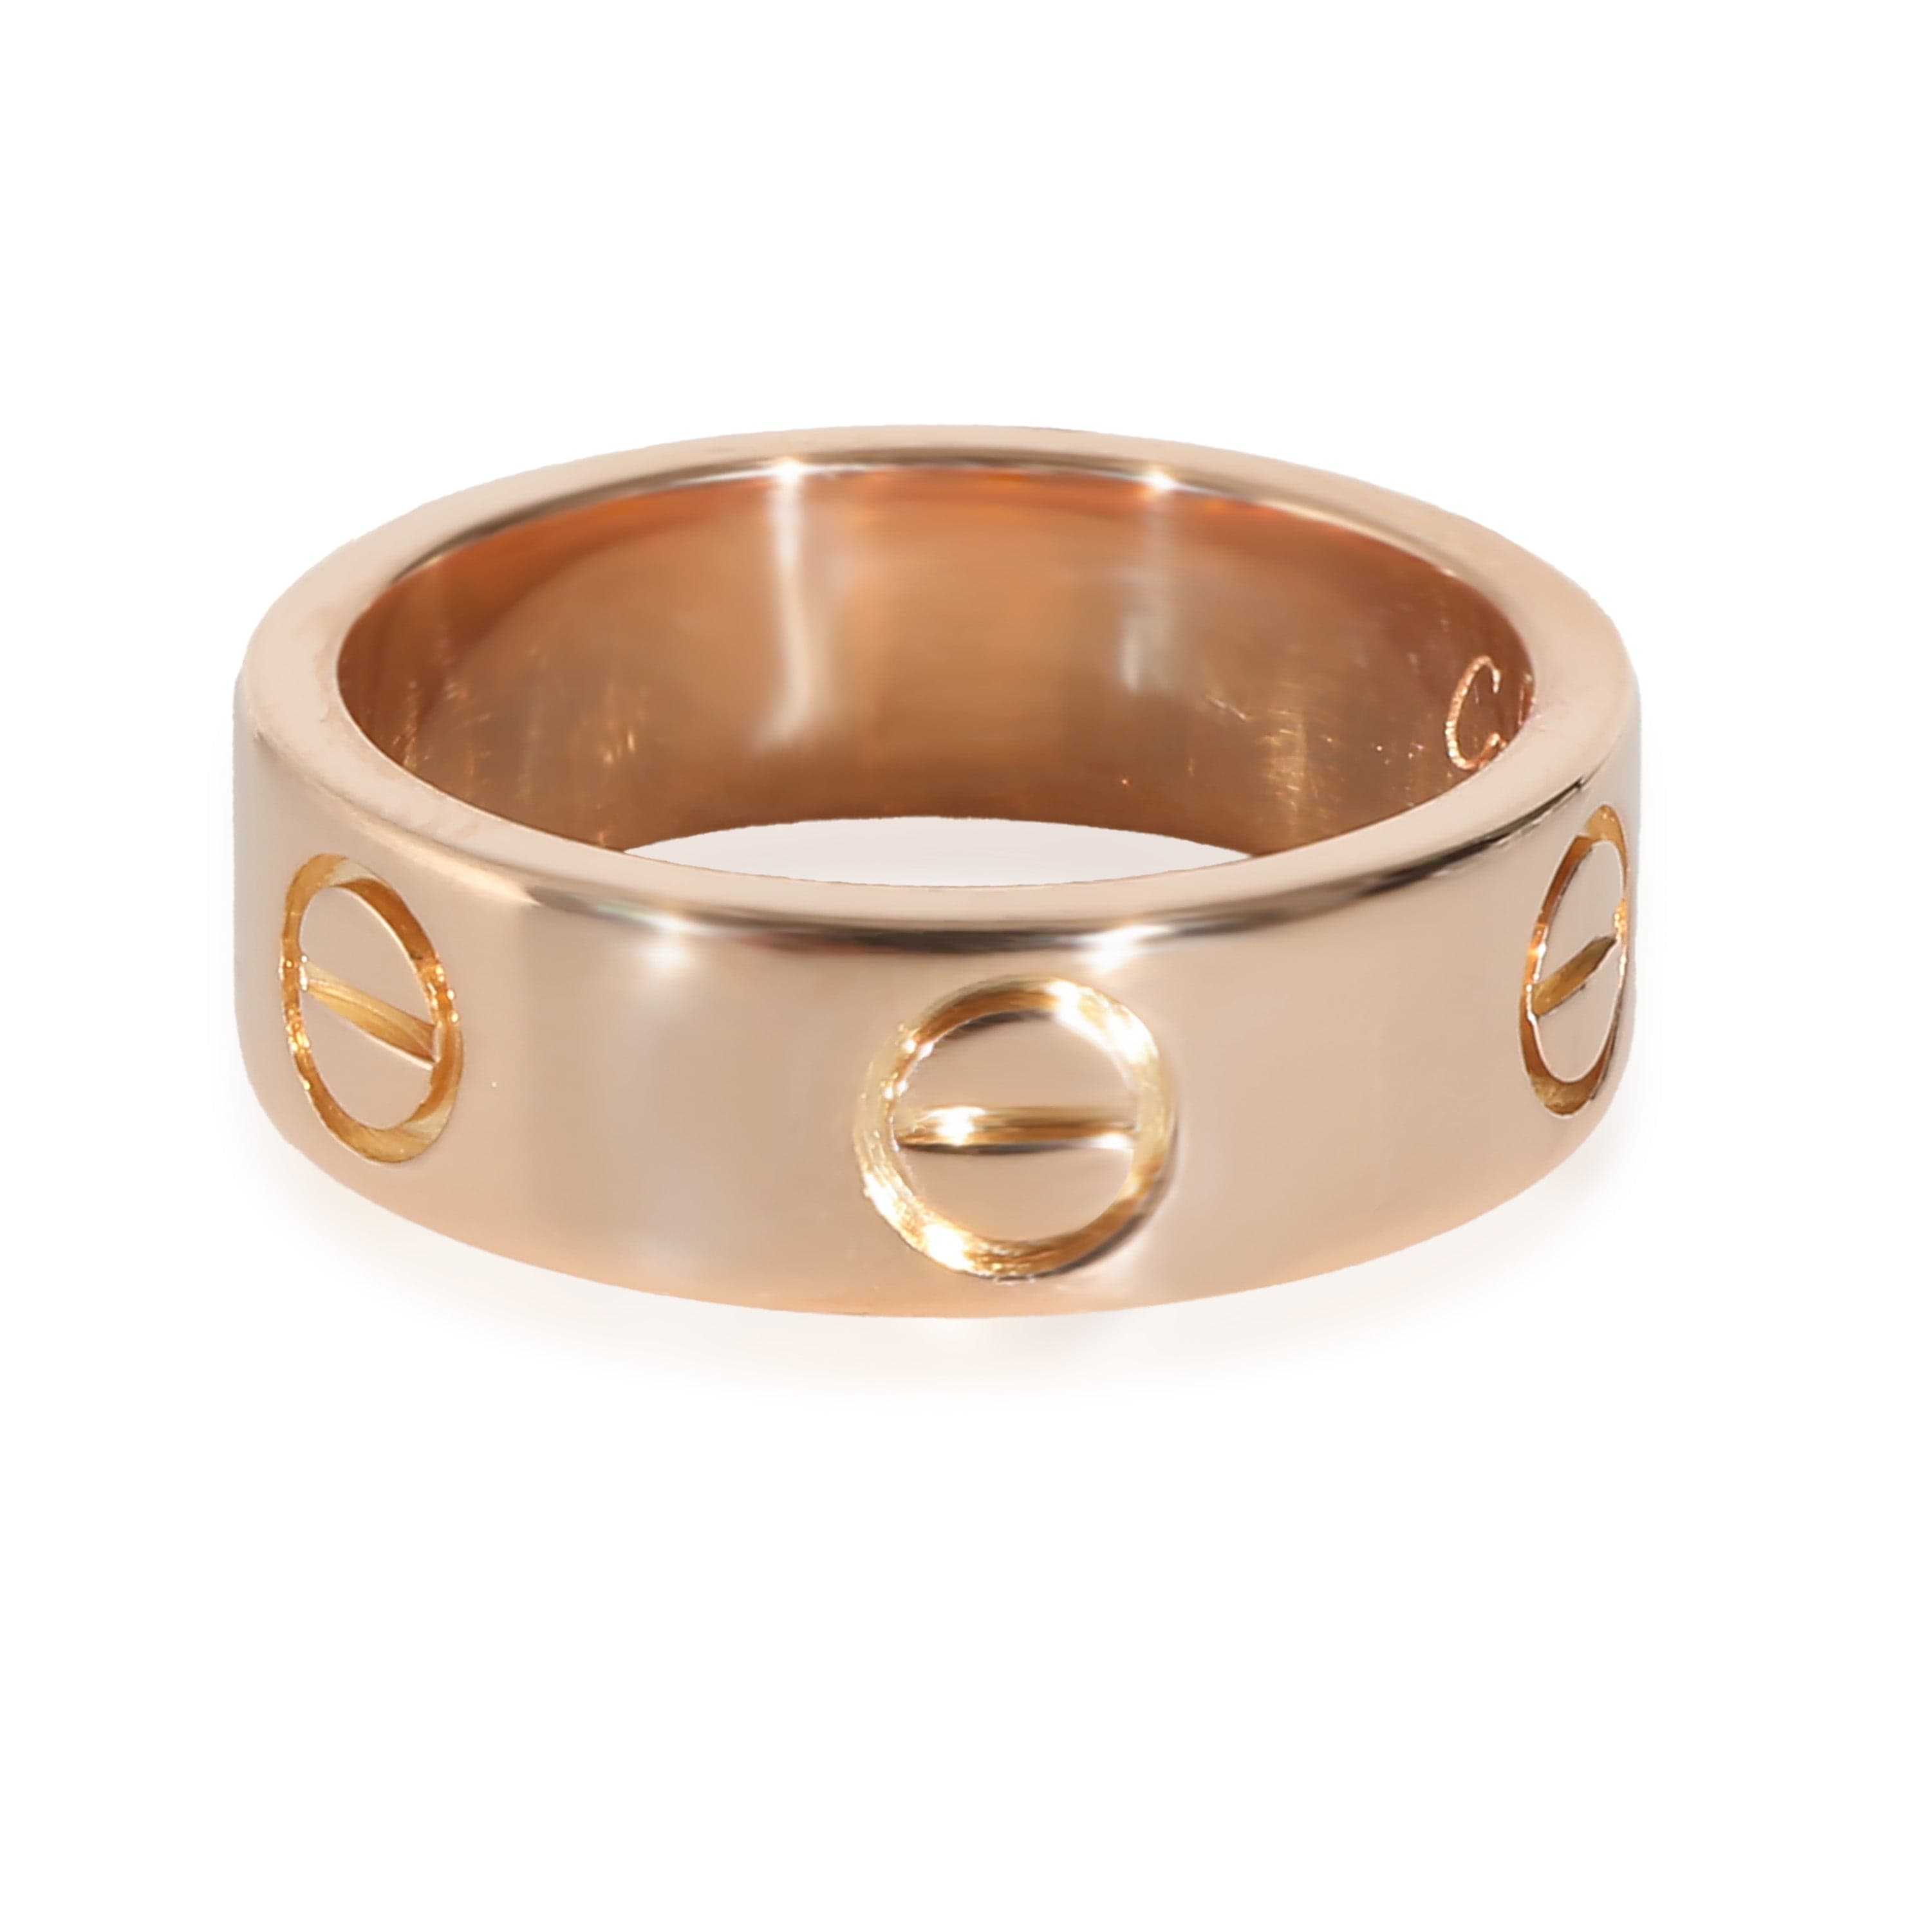 Cartier Cartier Love Fashion Ring in 18k Rose Gold